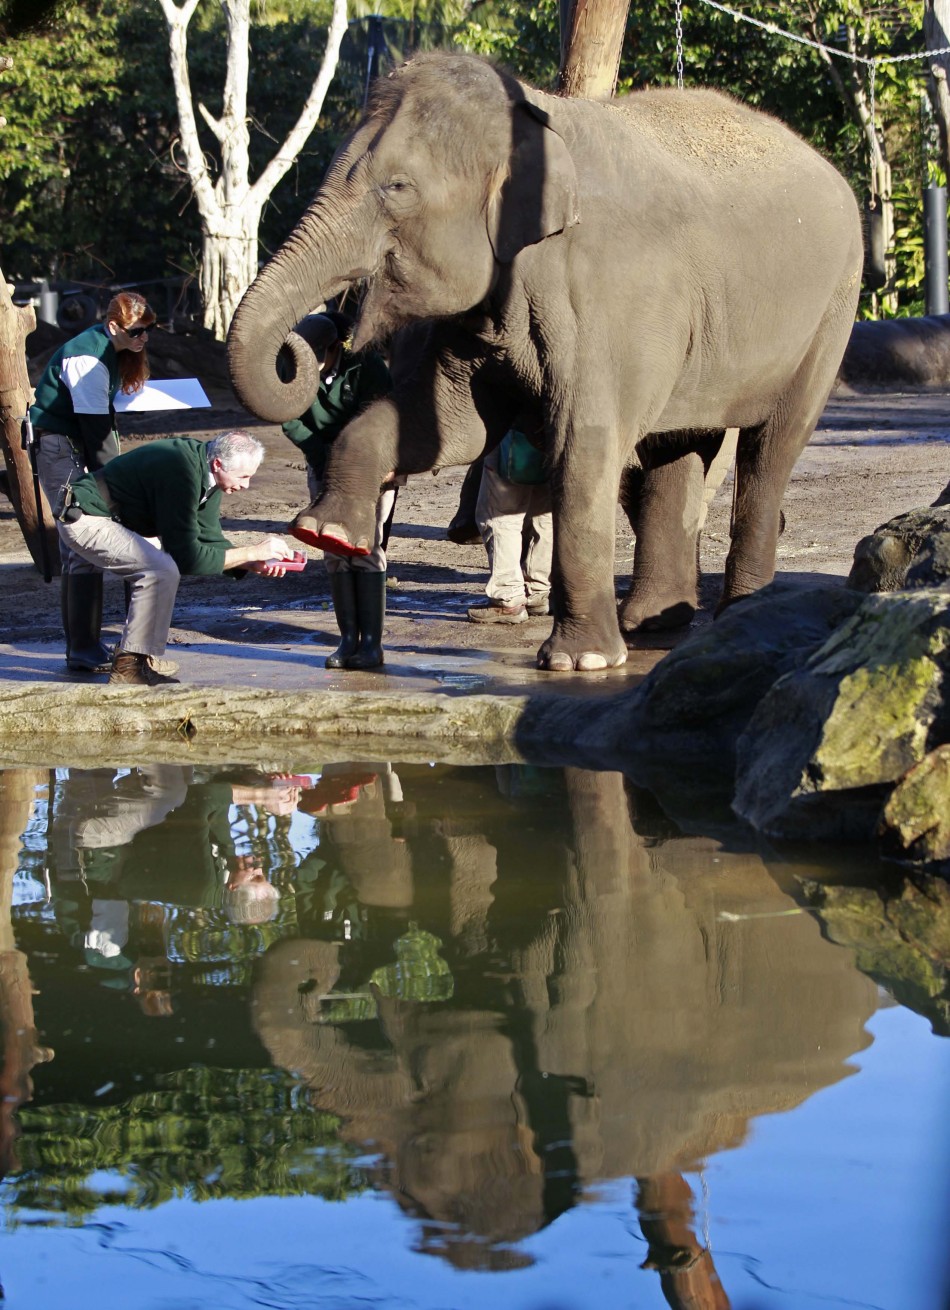 Elephant keeper Miller takes the footprint of elephant Pak Boon at Taronga Zoo in Sydney